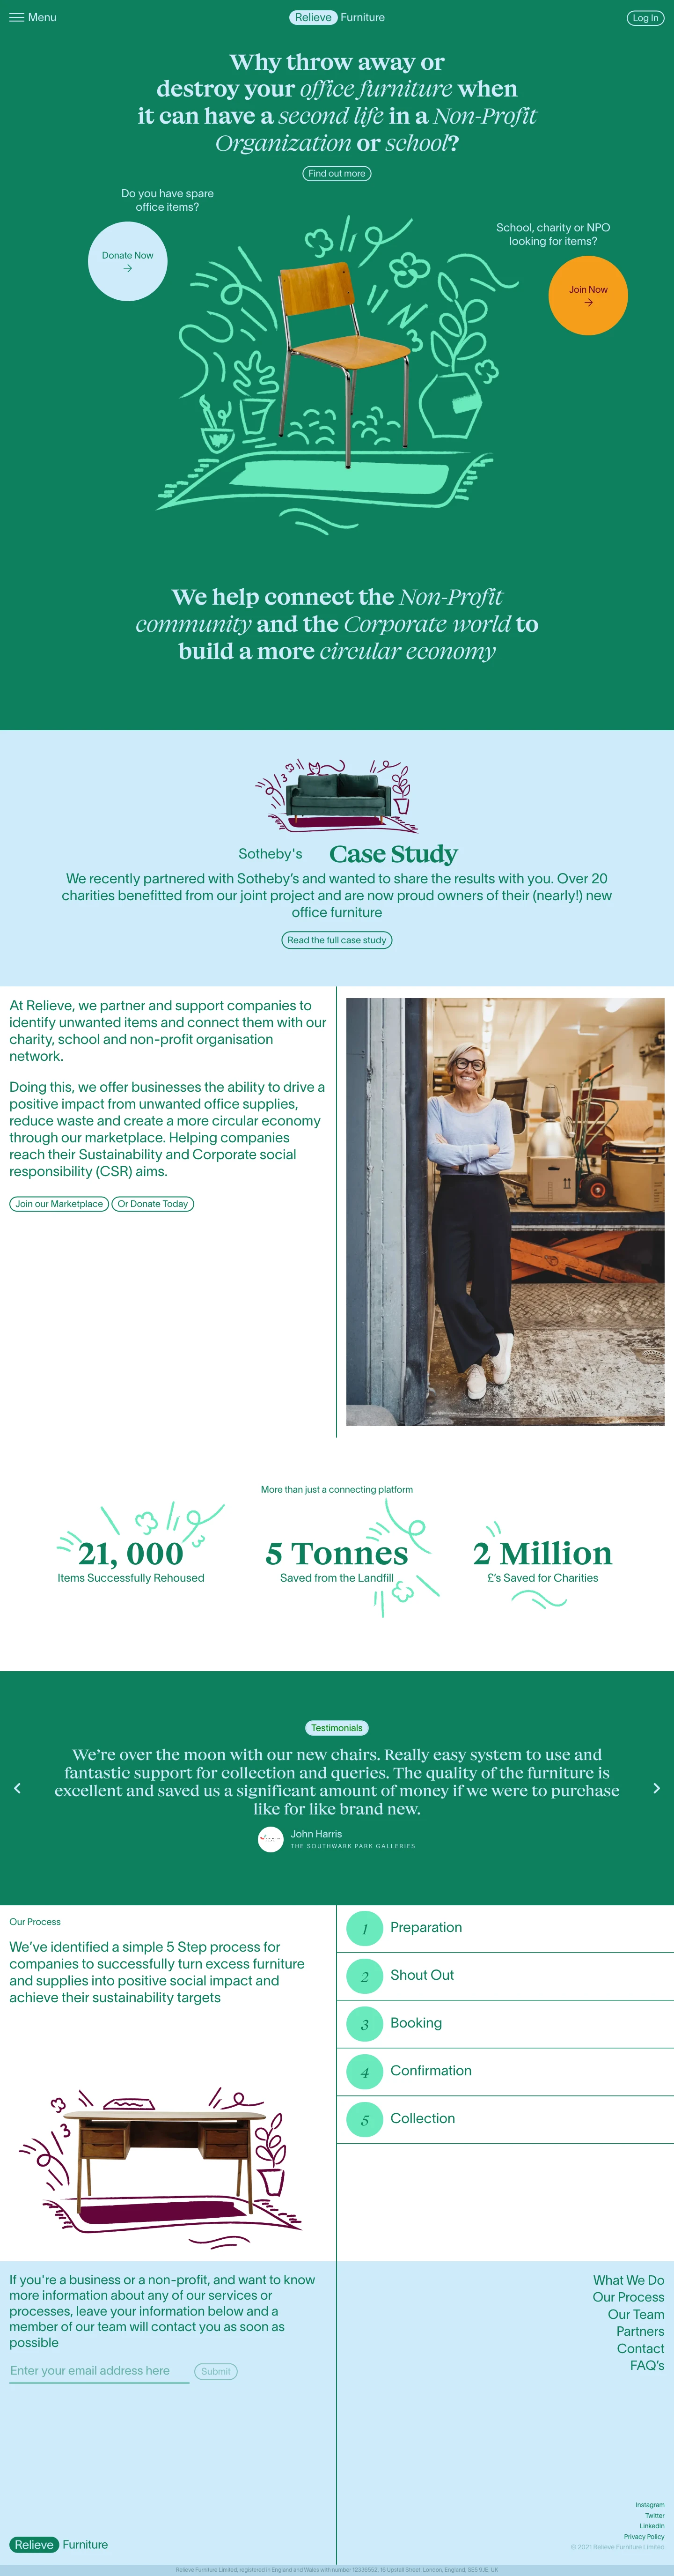 Relieve Furniture Landing Page Example: Ethical and socially responsible office removals start with Relieve Furniture. We help businesses identify excess or unwanted office furniture which they can donate and recycle to our network of charities and schools.